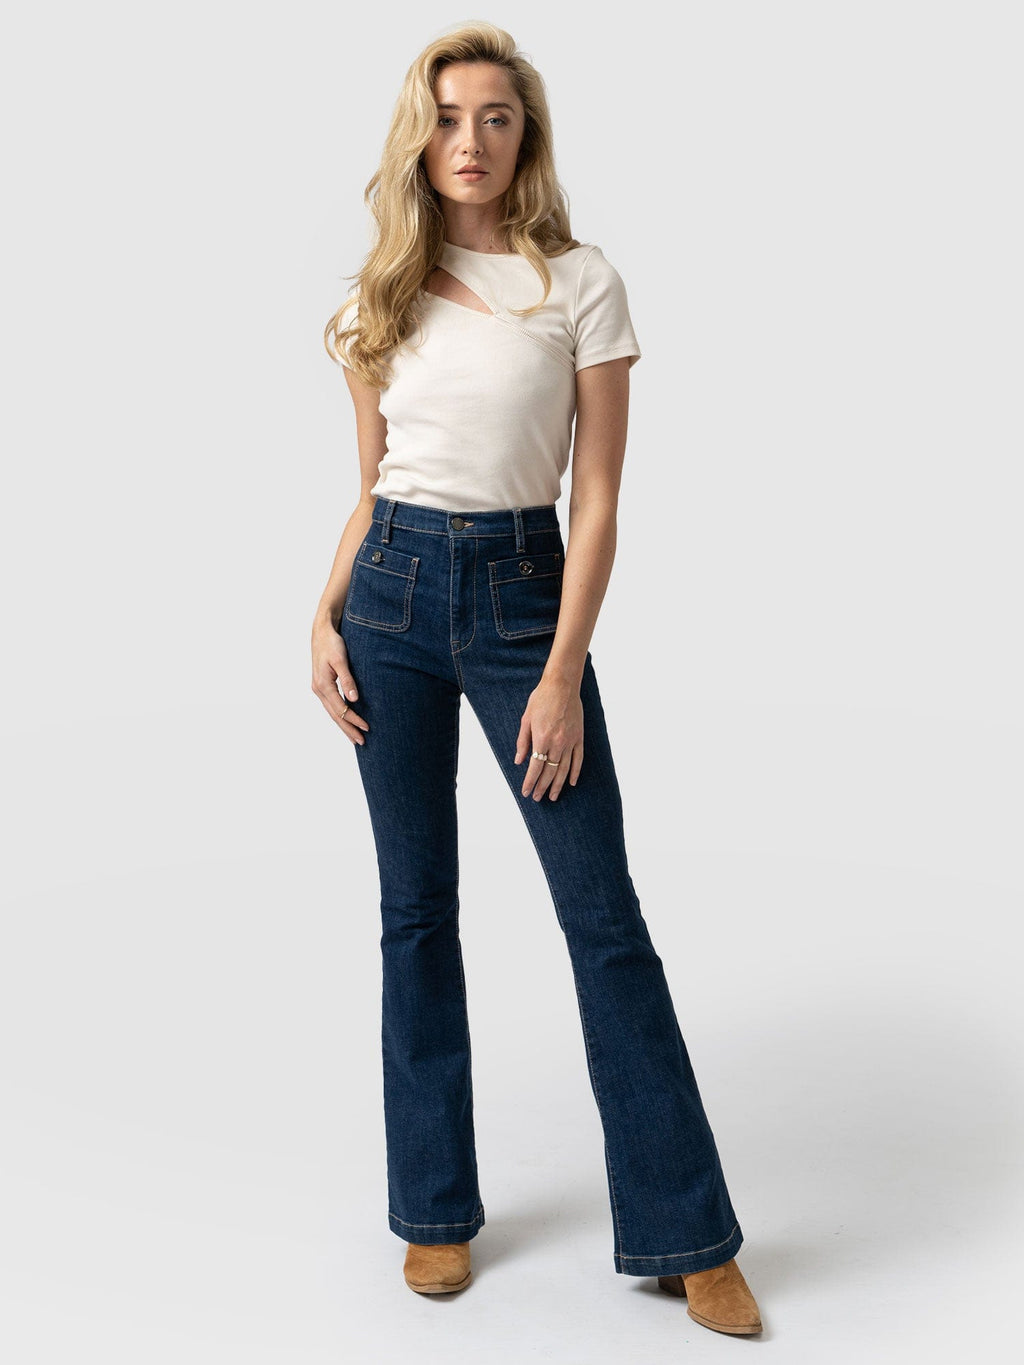 How to Wear Flared Jeans + 10 Outfits Ideas You Can Copy - By Lisa